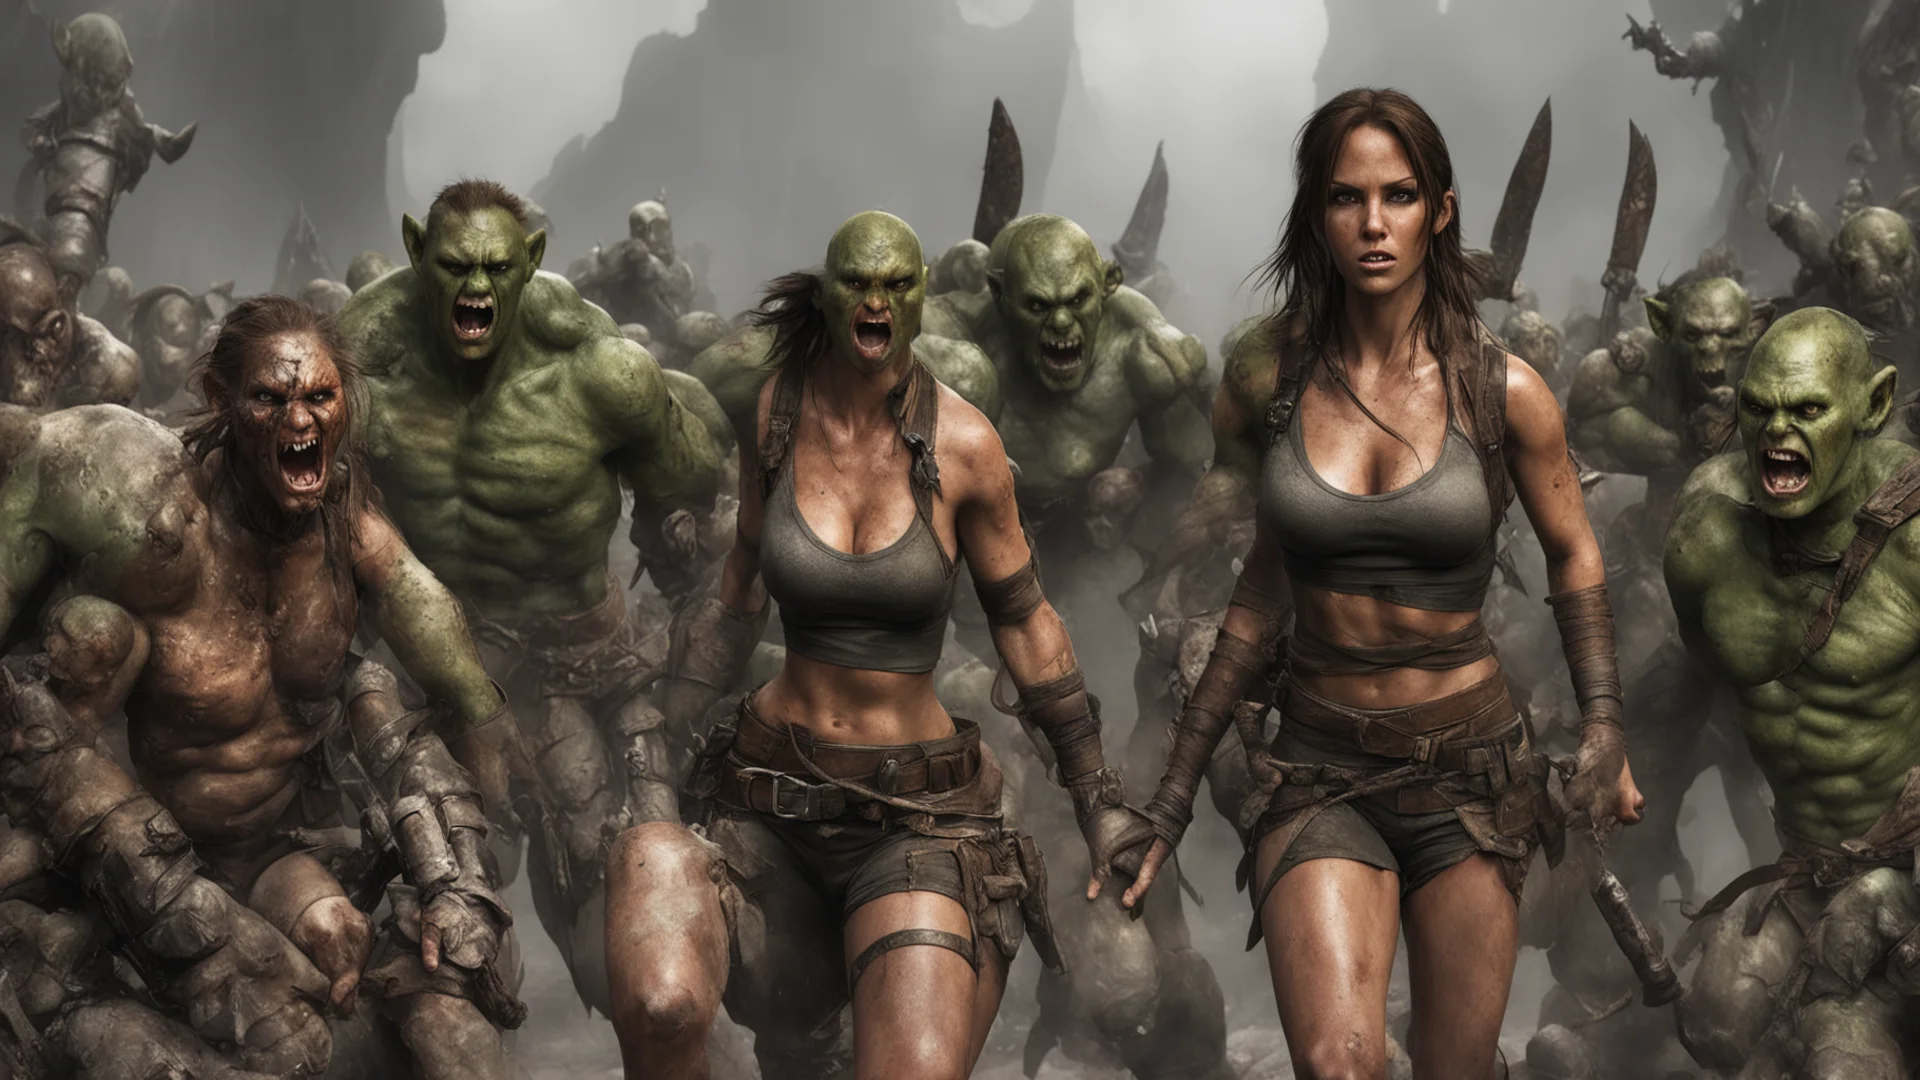 amazing fallen lara croft surrounded by angry orcs awesome portrait 2 wide